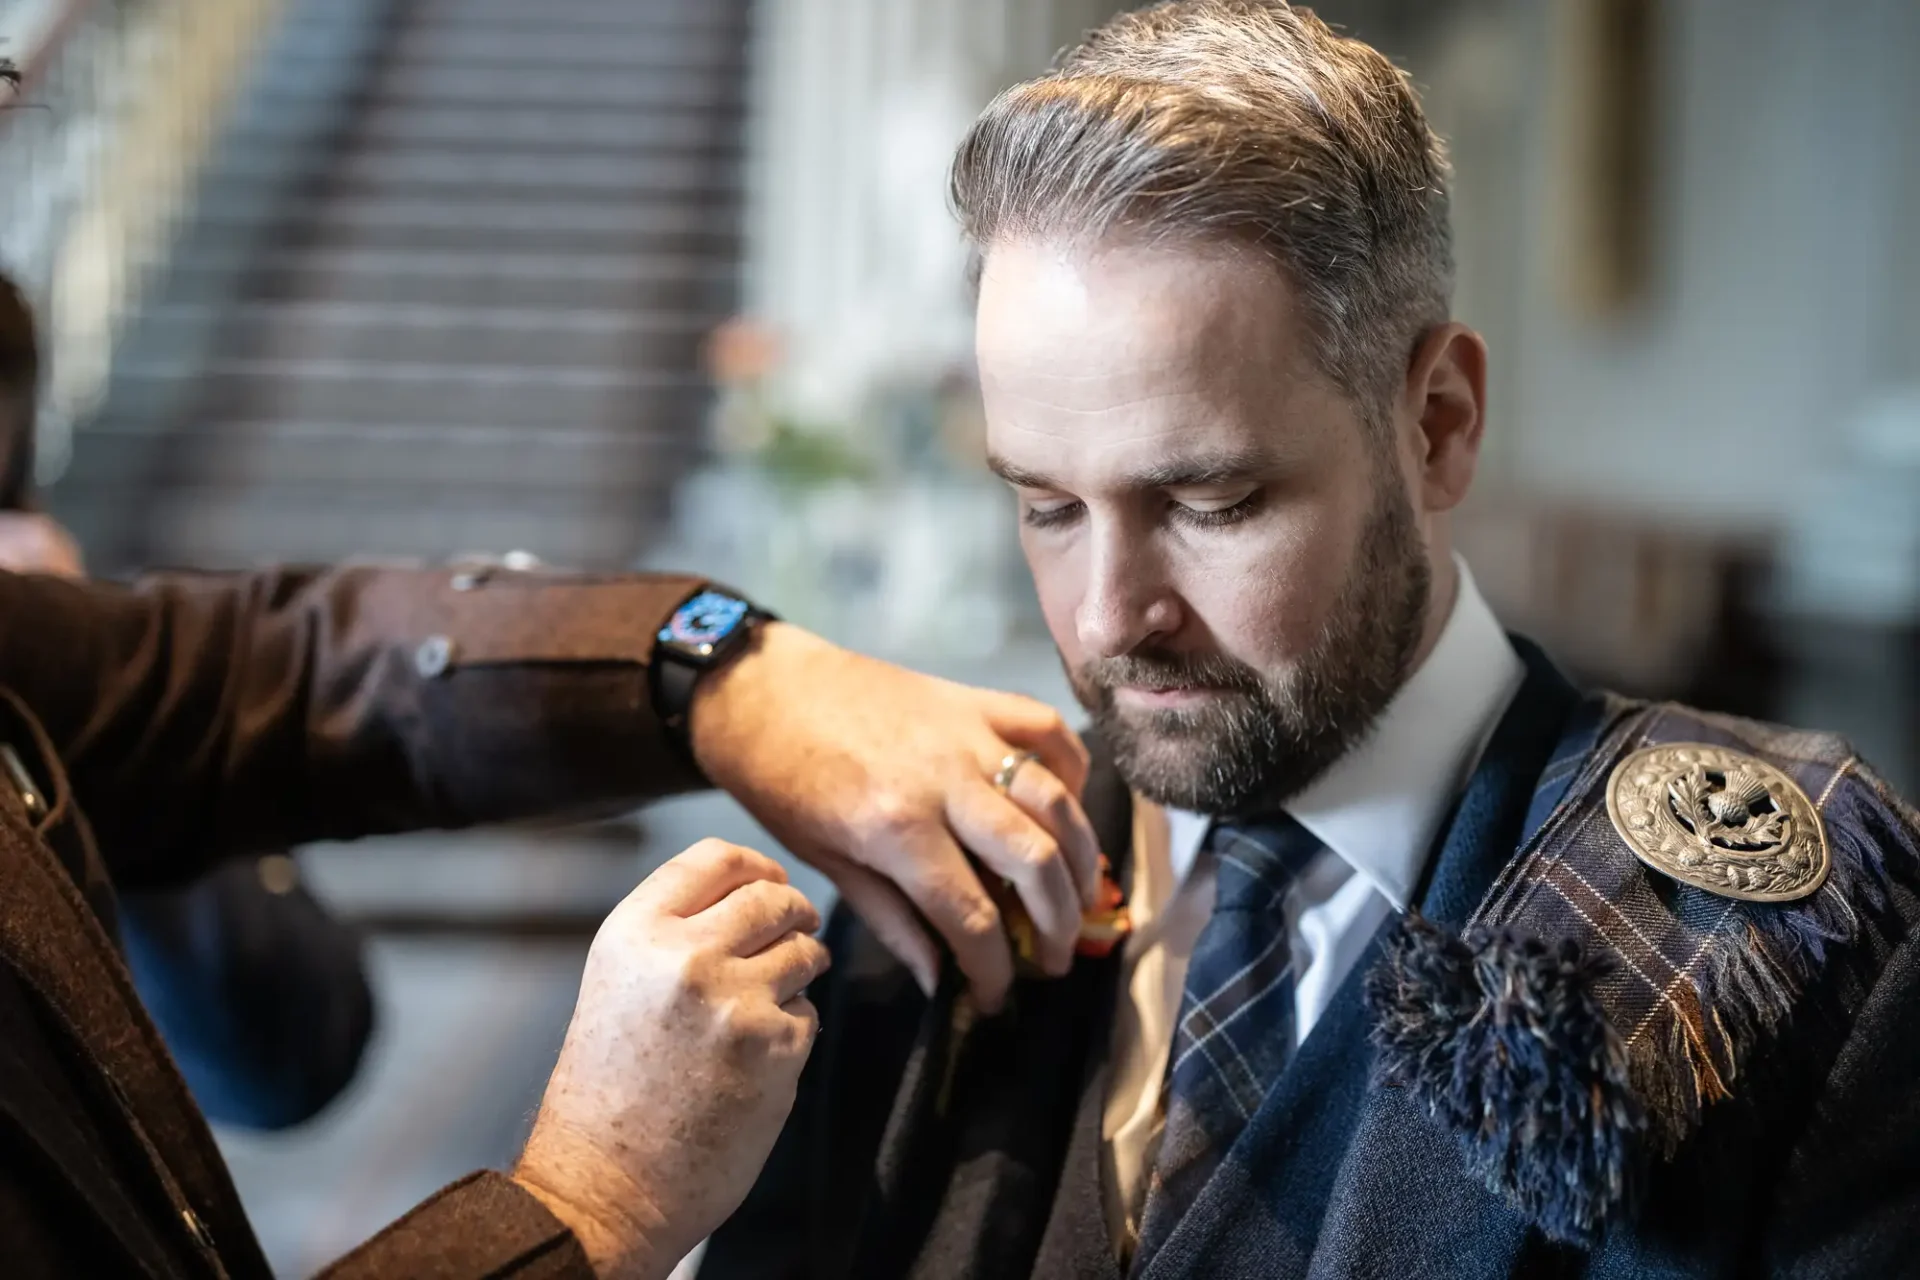 A man in a formal kilt outfit getting assistance with his cufflinks indoors.